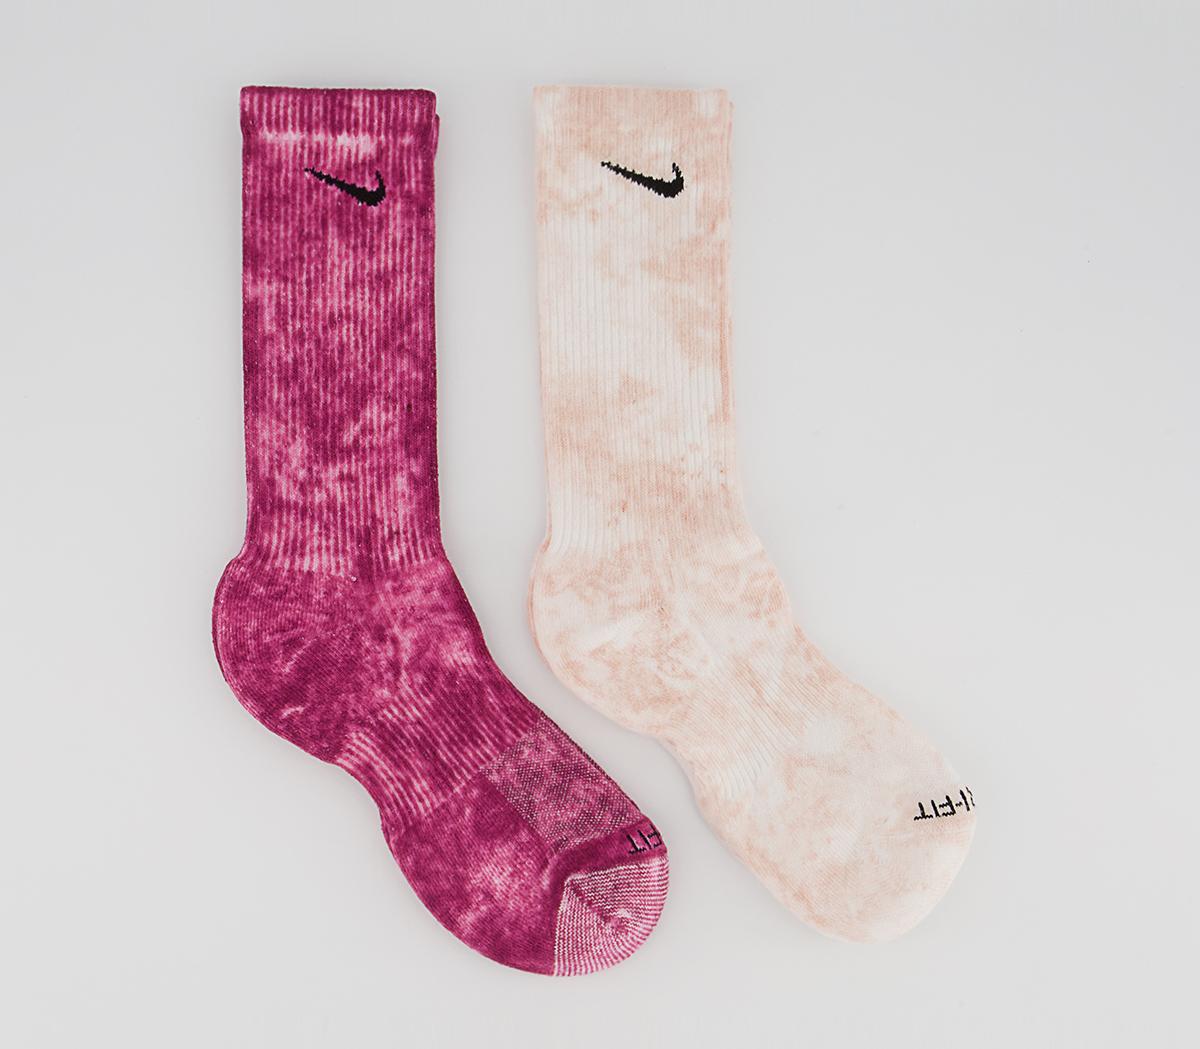 NikeCushioned Tie Dye Crew Socks 2 PairsMulti Colour Red